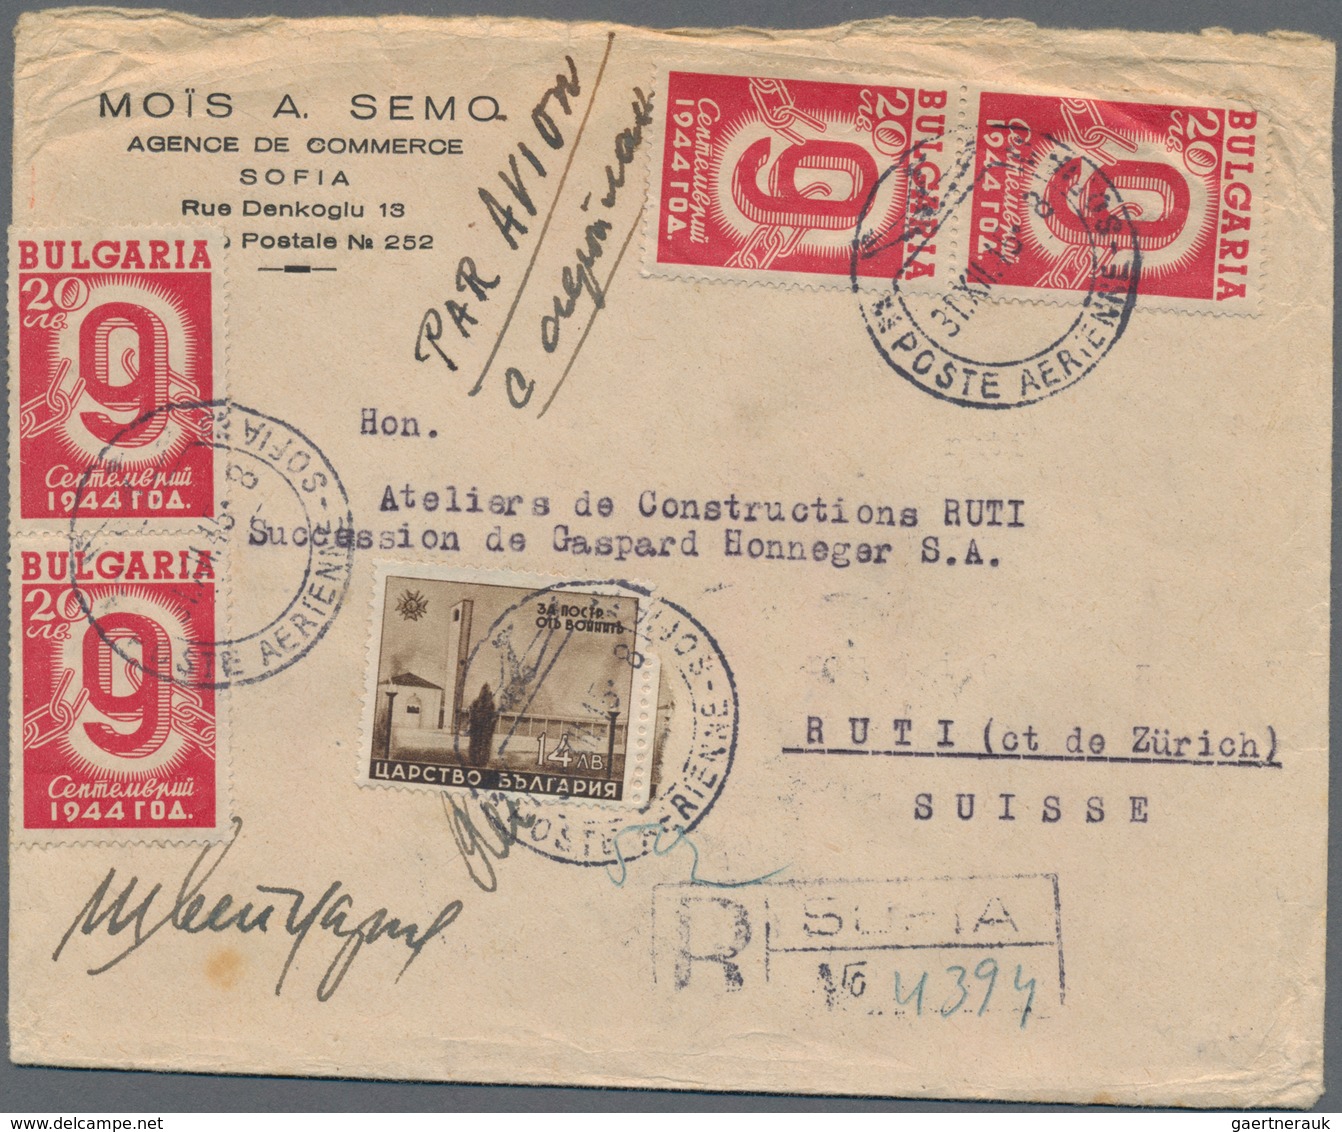 Bulgarien: 1945/1951, assortment of apprx. 115 covers/cards/used stationeries, mainly commercial mai